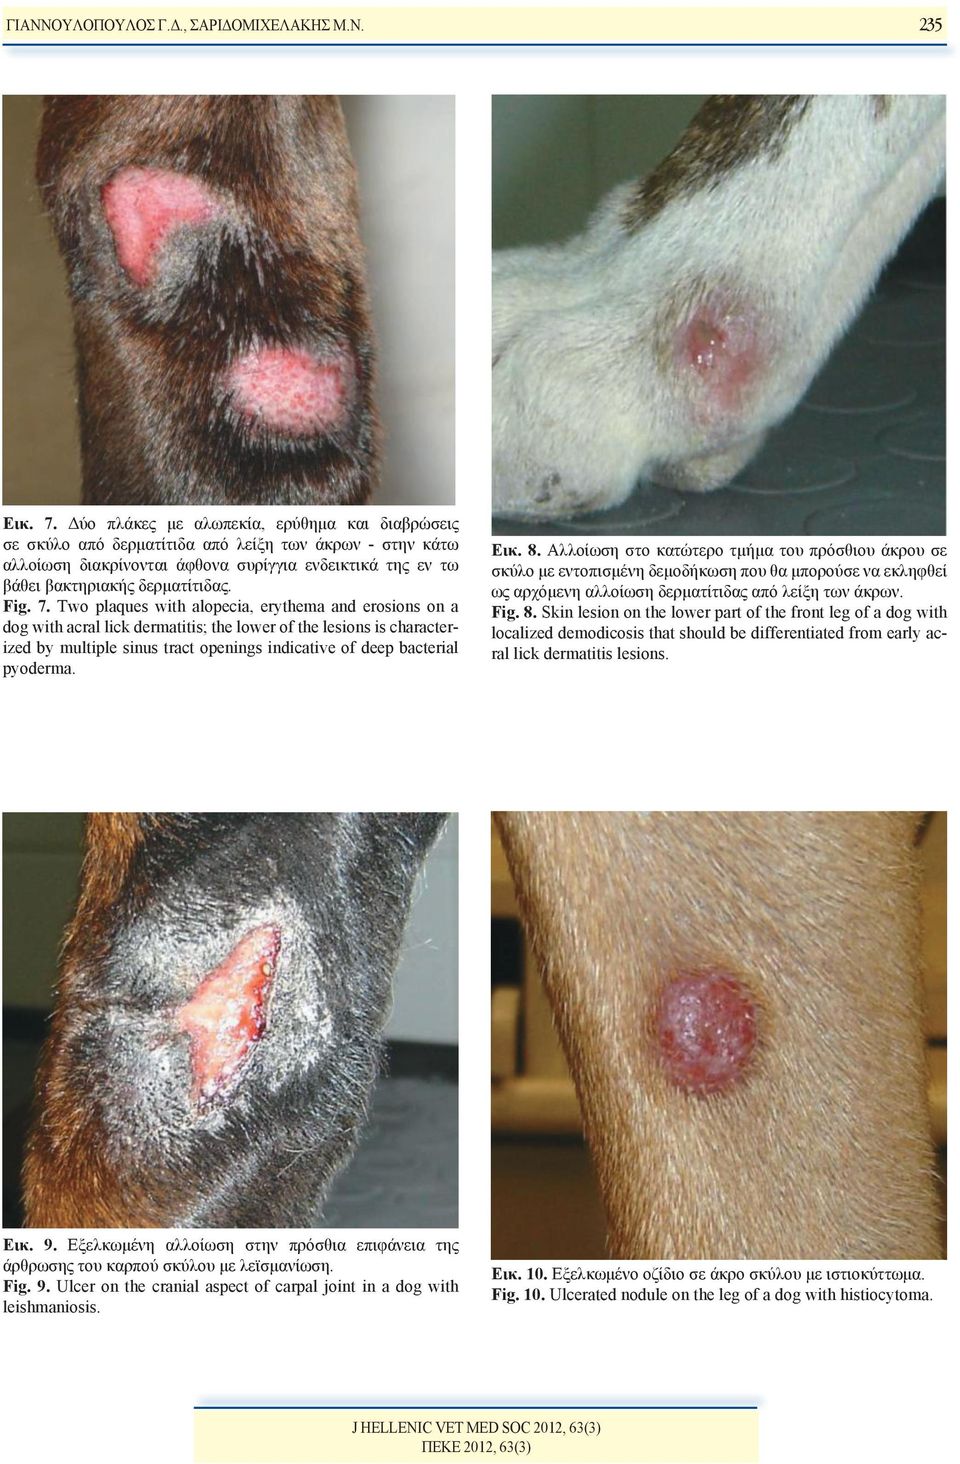 7. Two plaques with alopecia, erythema and erosions on a dog with acral lick dermatitis; the lower of the lesions is characterized by multiple sinus tract openings indicative of deep bacterial